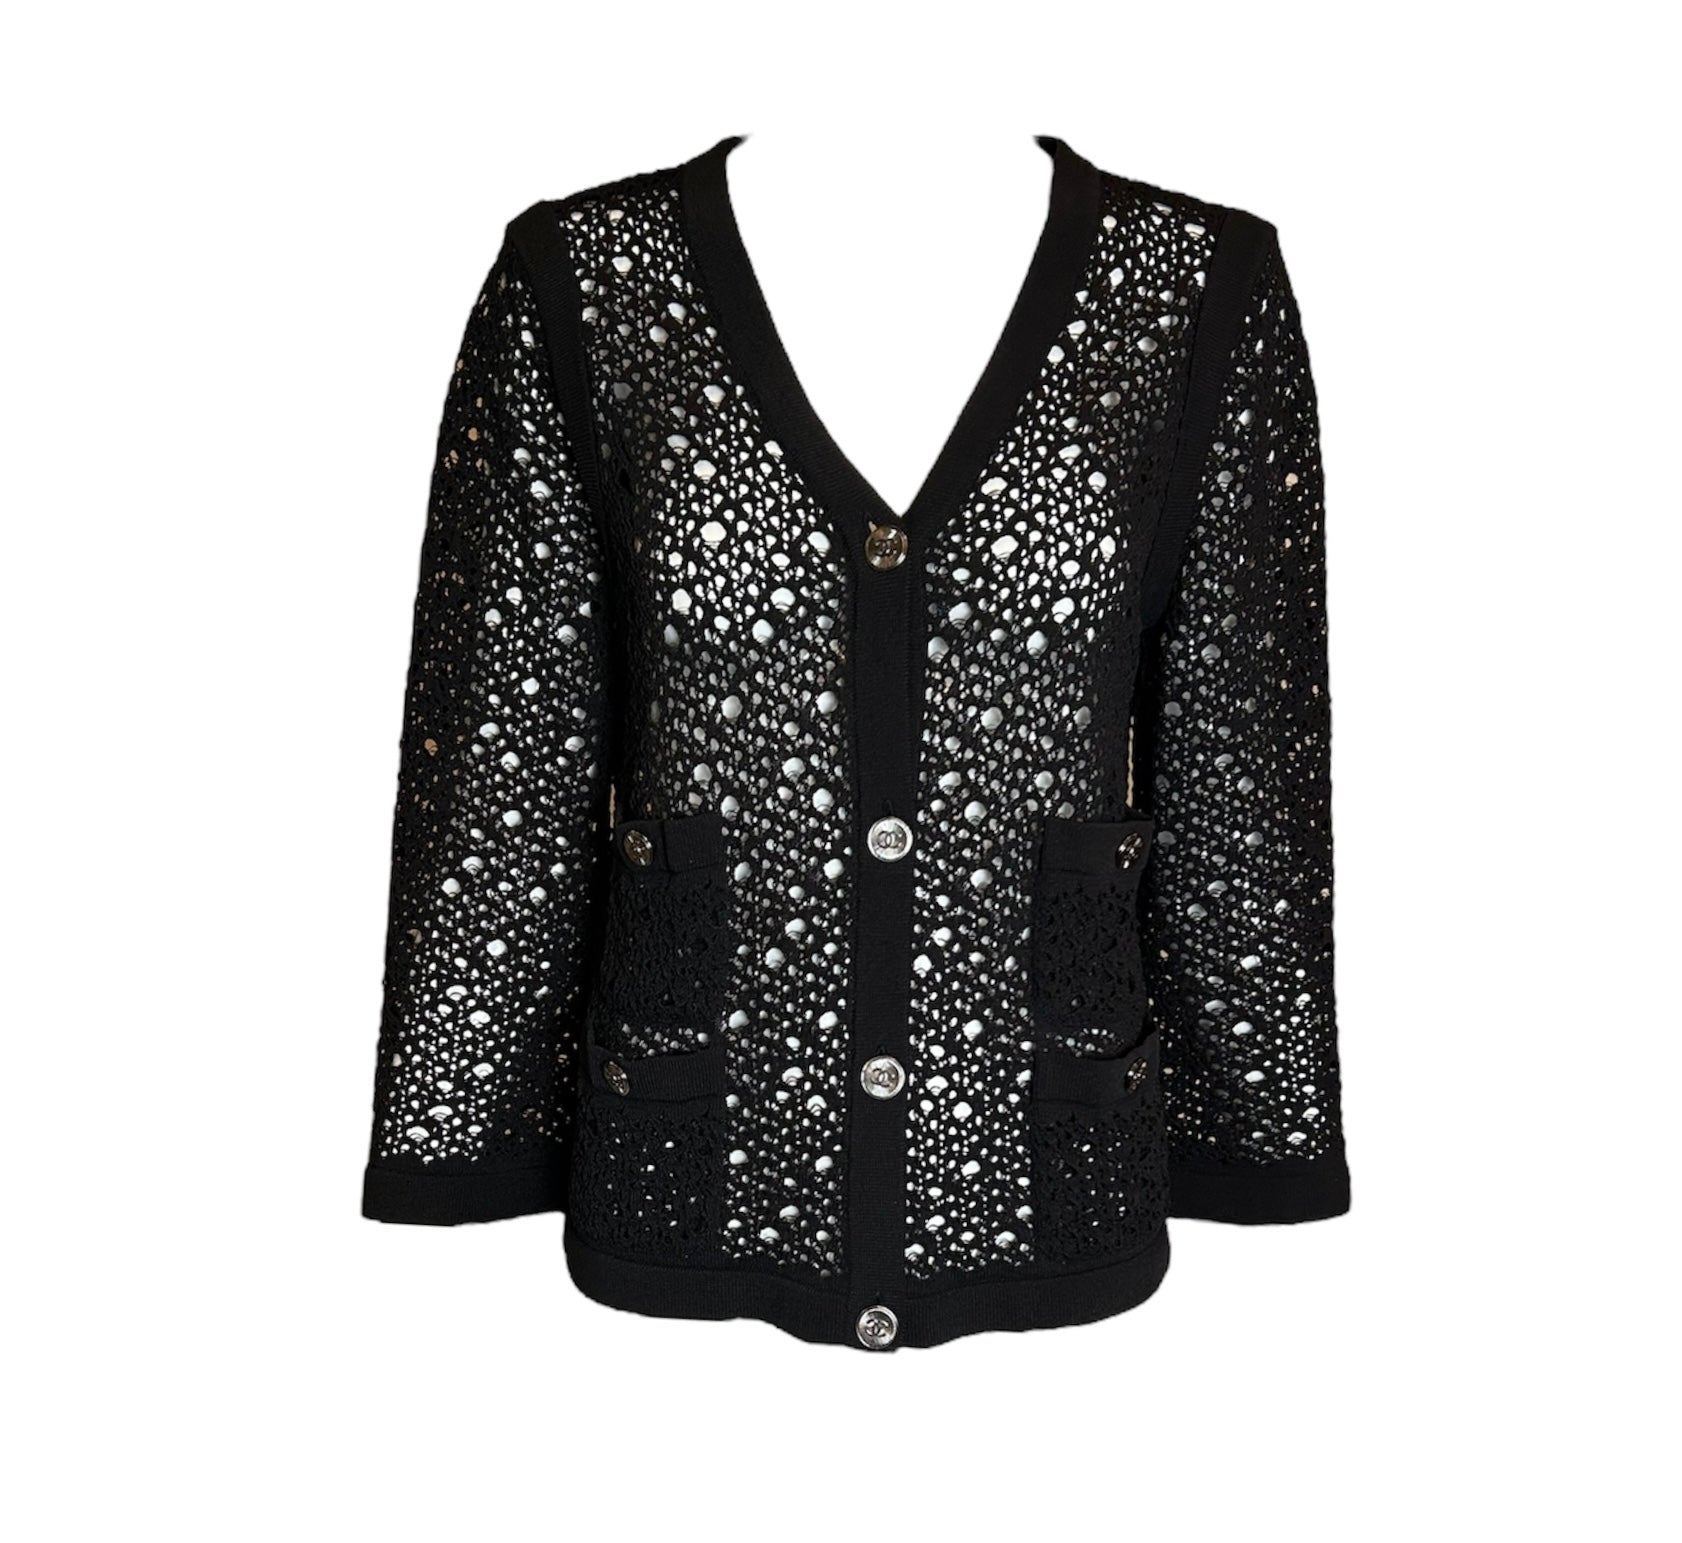 CHANEL Net-Knit Black Cardigan with Logo Buttons FRONT PHOTO 1 OF 5